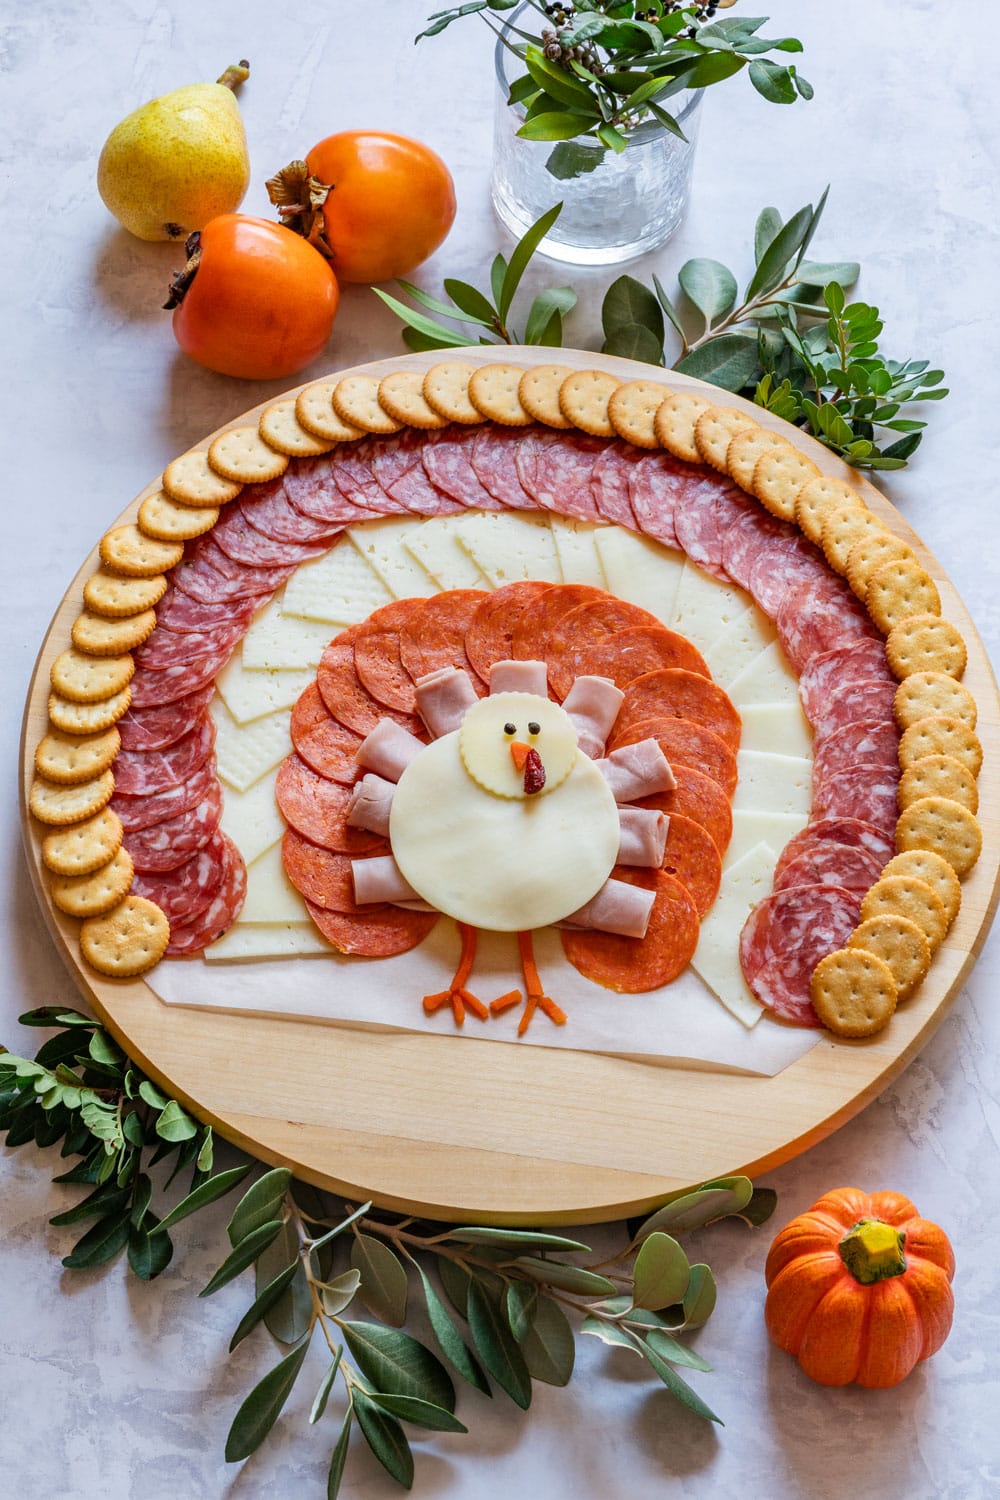 Turkey shaped charcuterie board for Thanksgiving.